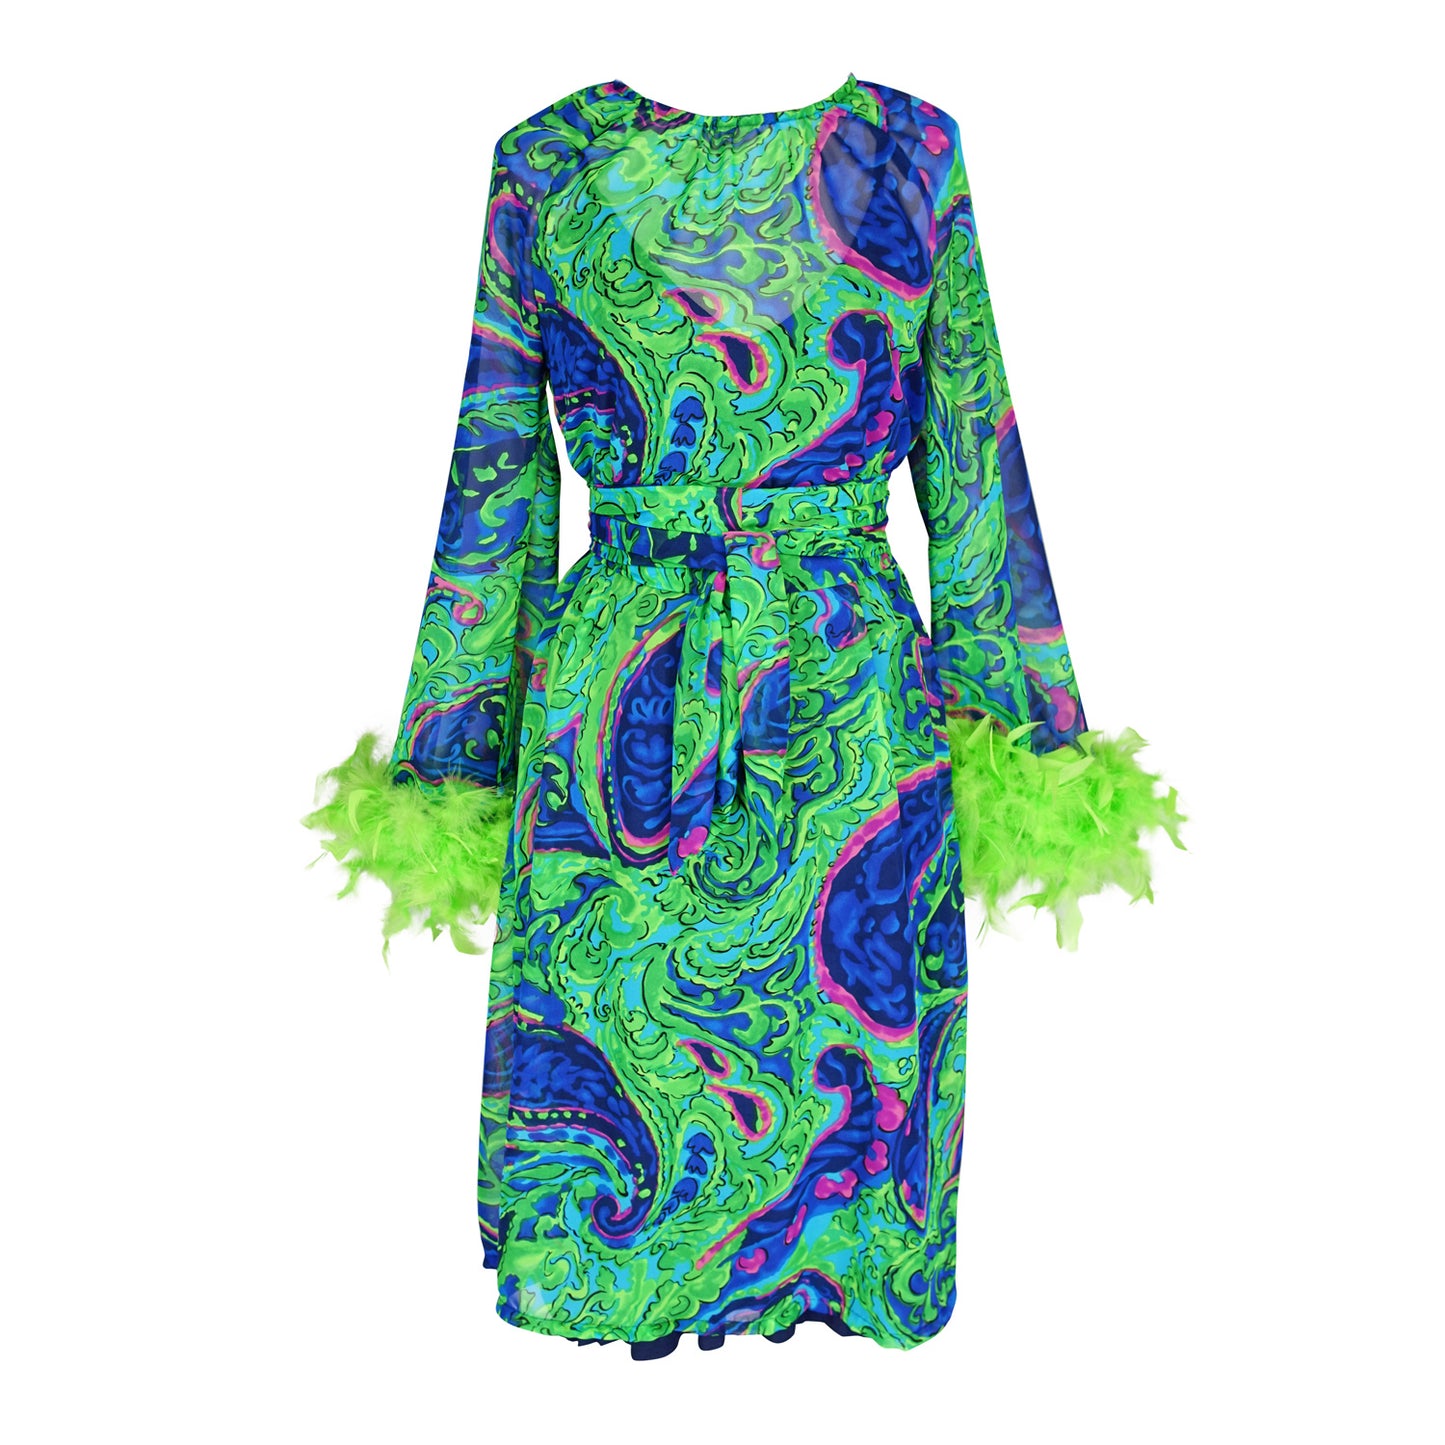 Funky fresh retro midi dress with royal blue and lime green abstract filigree swirl print with hints of aqua and fuchsia. The dress features a crew neck, keyhole detail at upper back, 3/4 bell sleeves with neon green feathers at cuff, a knee-length hem, and optional wrap tie for a cinched waist.